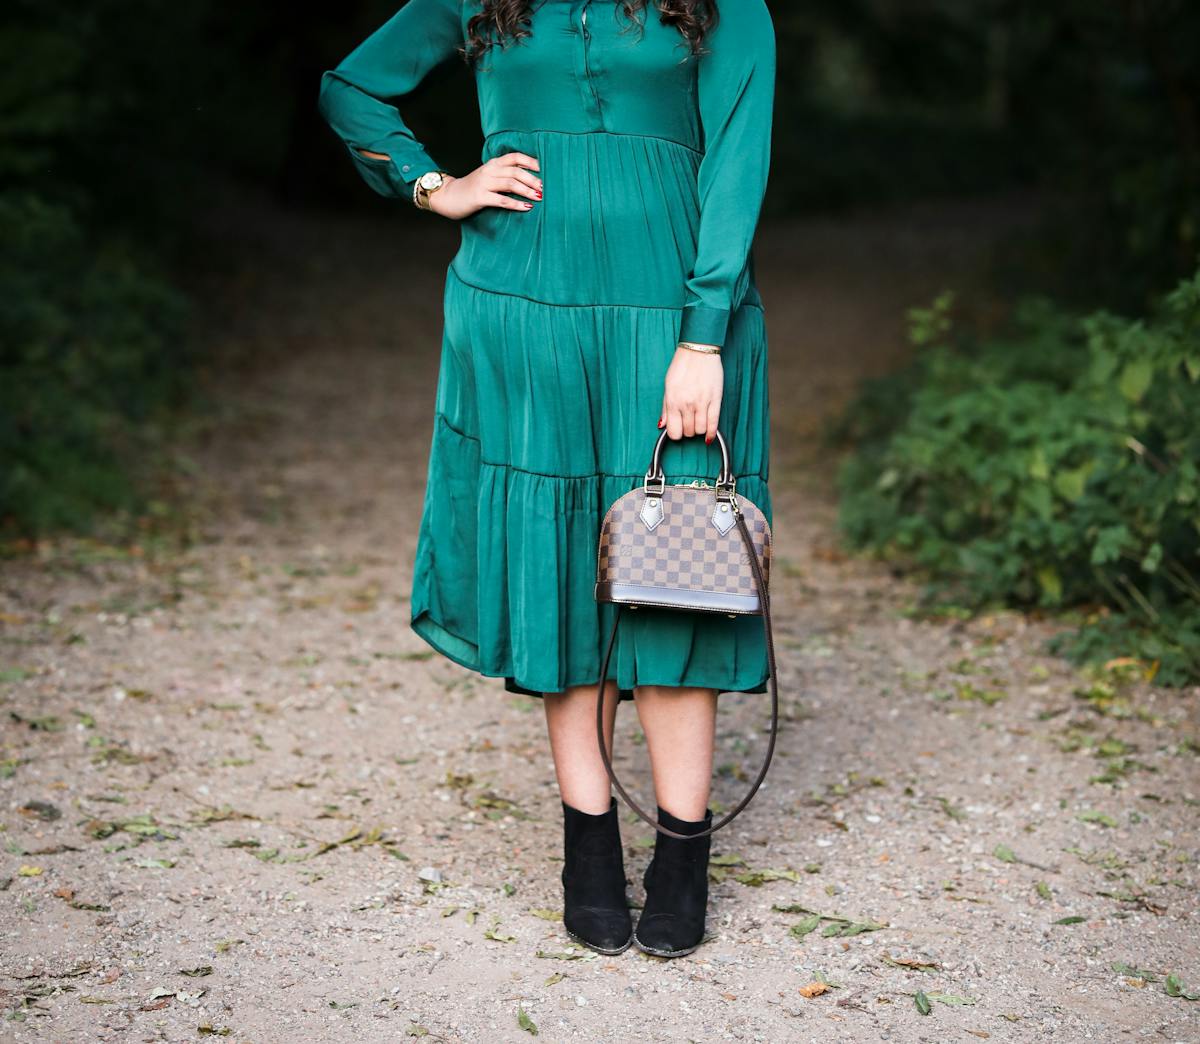 Photograph of a woman from her shoulders to her feet, wearing an emerald green dress with a shiny lustre. She is standing with her right hand on her hip and in her left hand she is holding a small hand bag in front of her left leg. In the background can be seen a park or woodland scene with a footpath disappearing into the distance. On either side of the path is green vegetation.